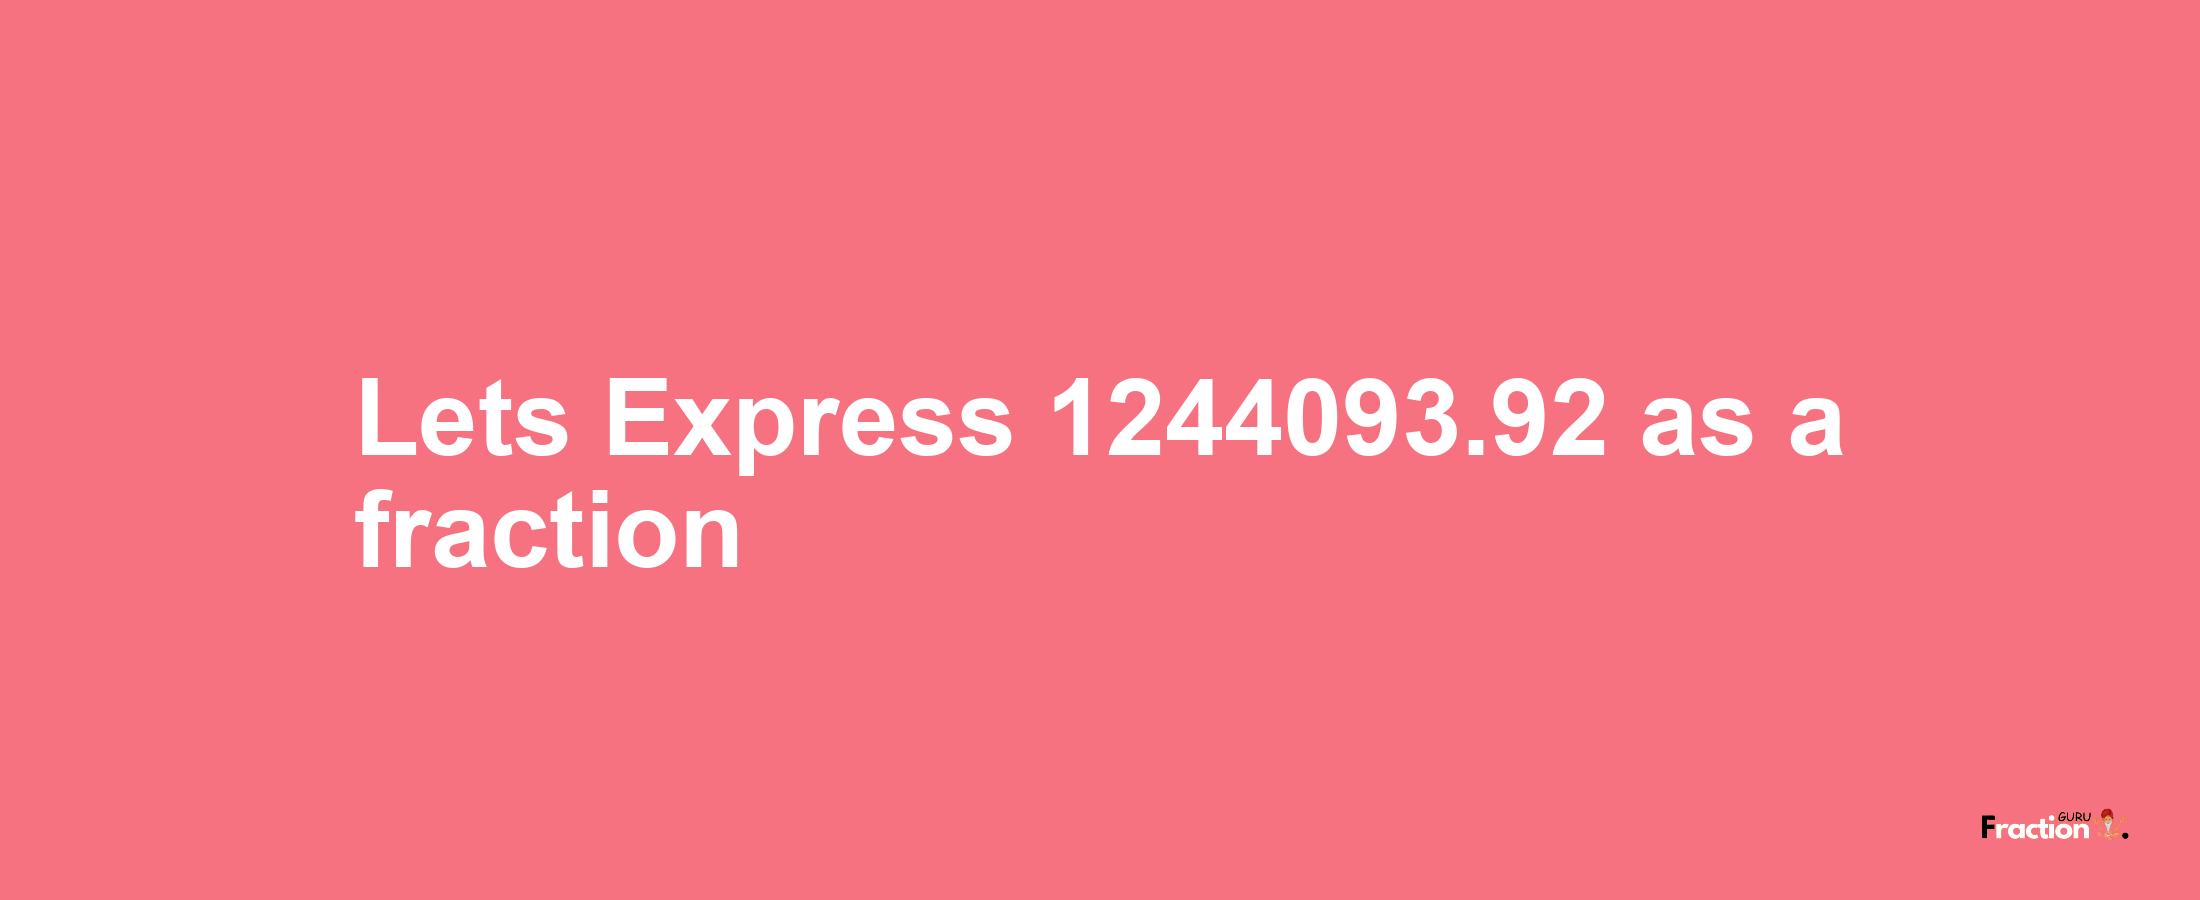 Lets Express 1244093.92 as afraction